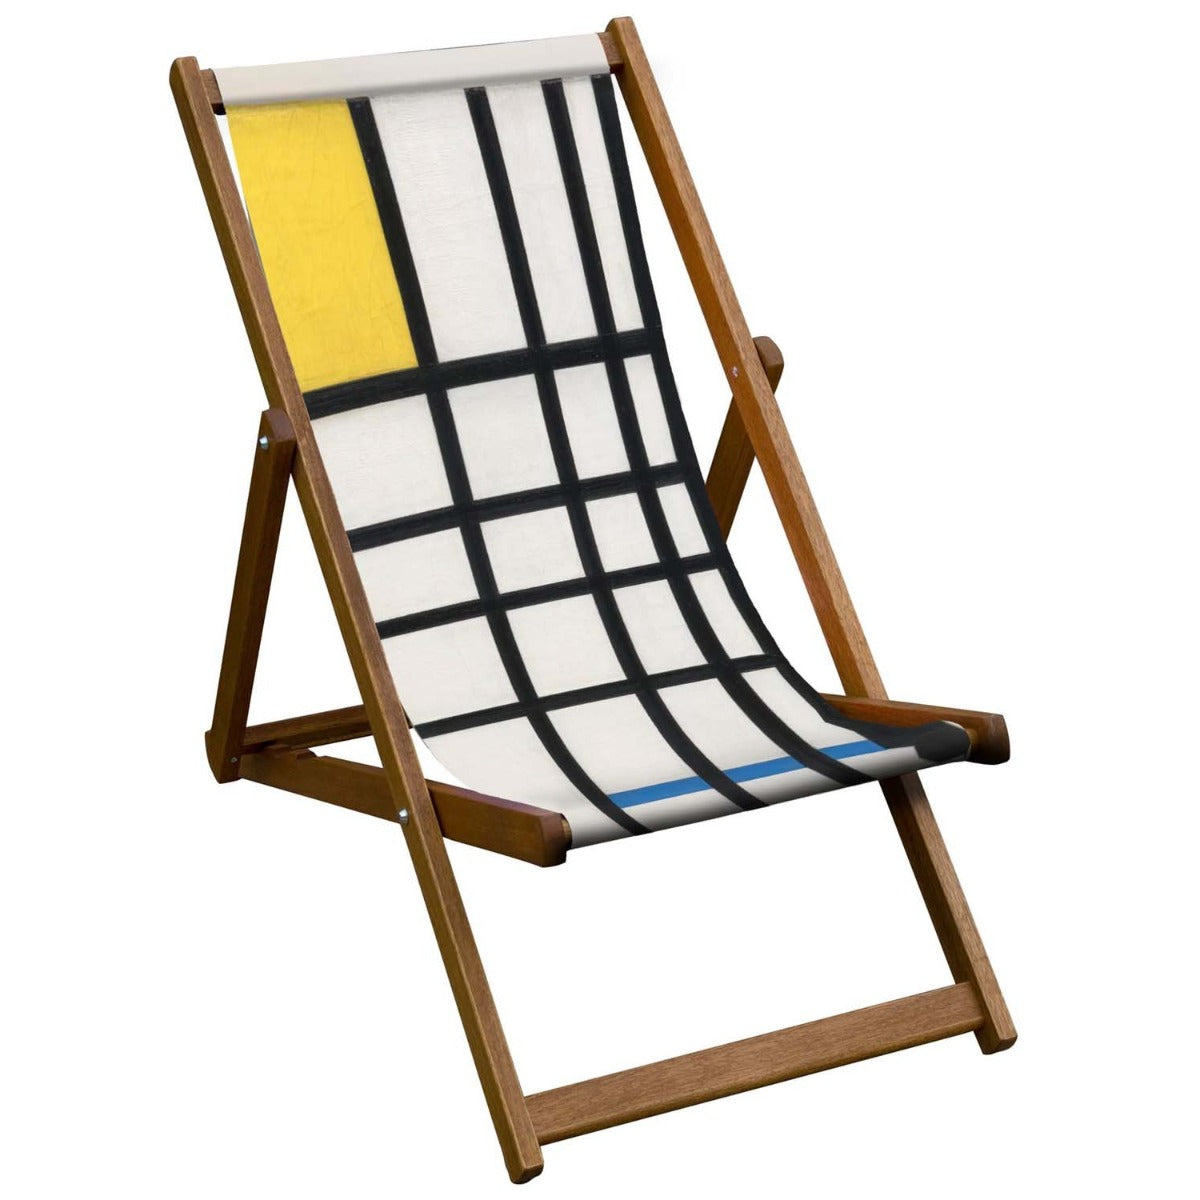 Vintage Inspired Wooden Deckchair-  'Composition with Yellow, Blue and Red'- Piet Mondrian